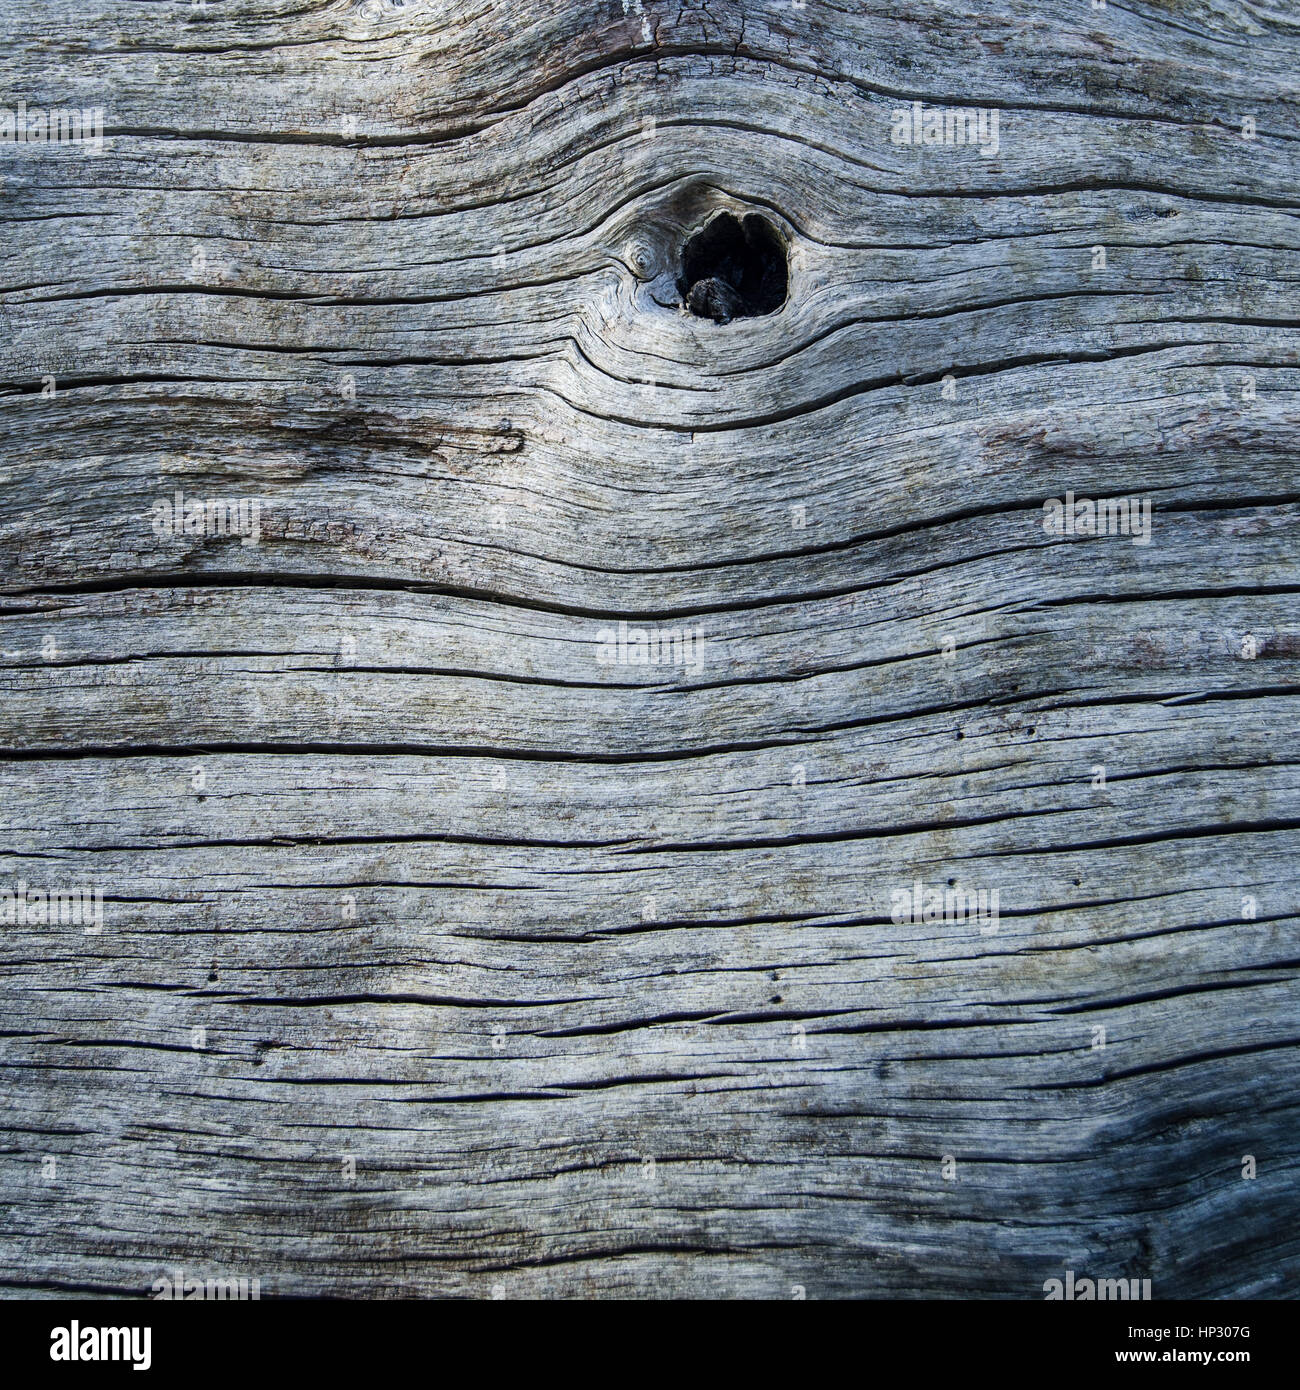 Abstract Background Wood Texture Of An Old Tree Trunk With Knot Stock Photo